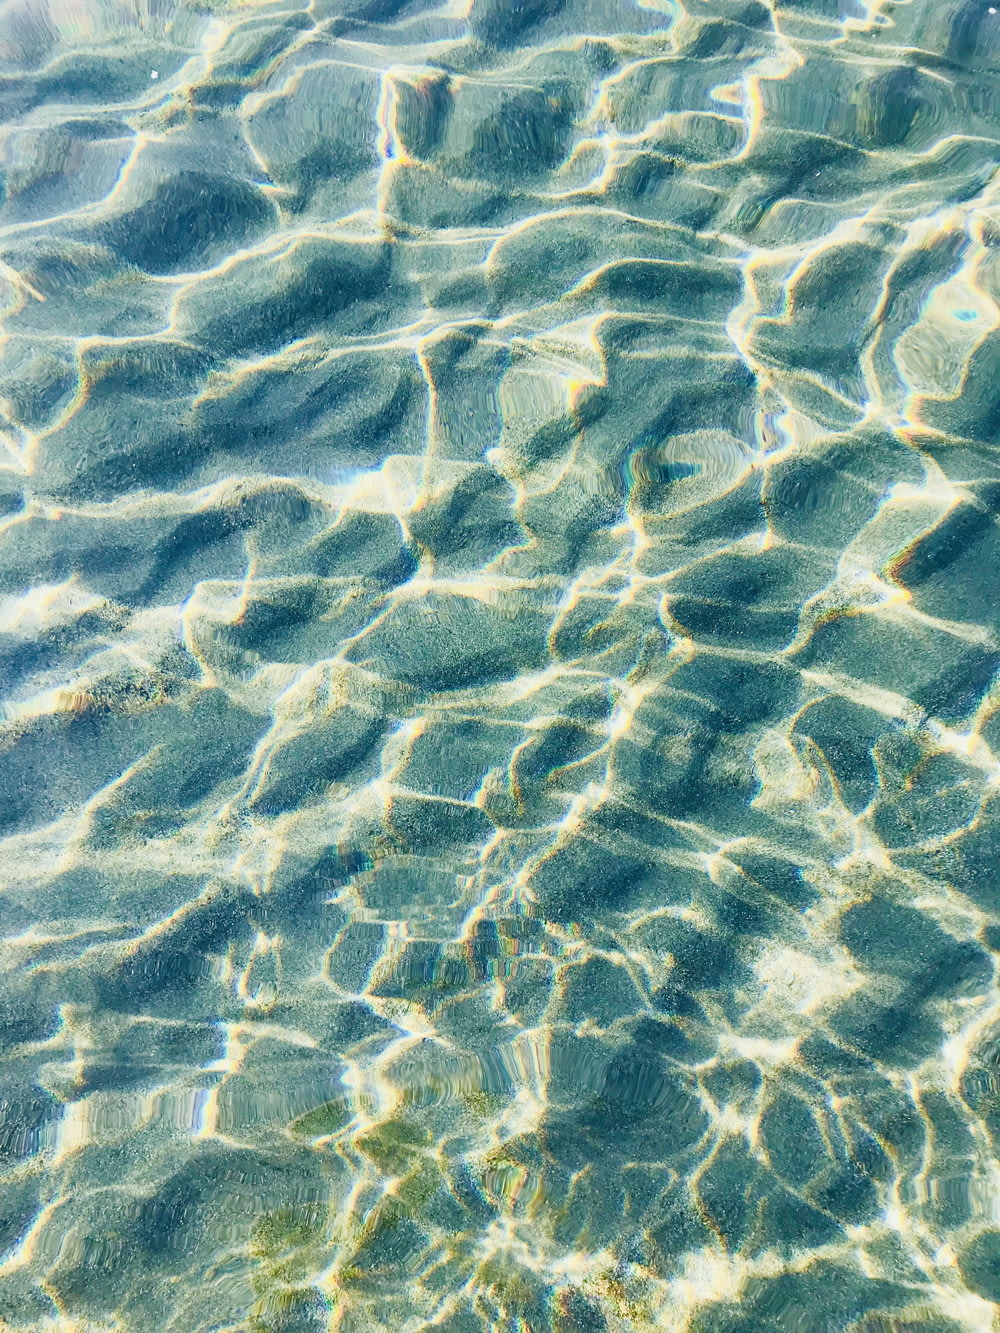 a close up of a body of water with ripples